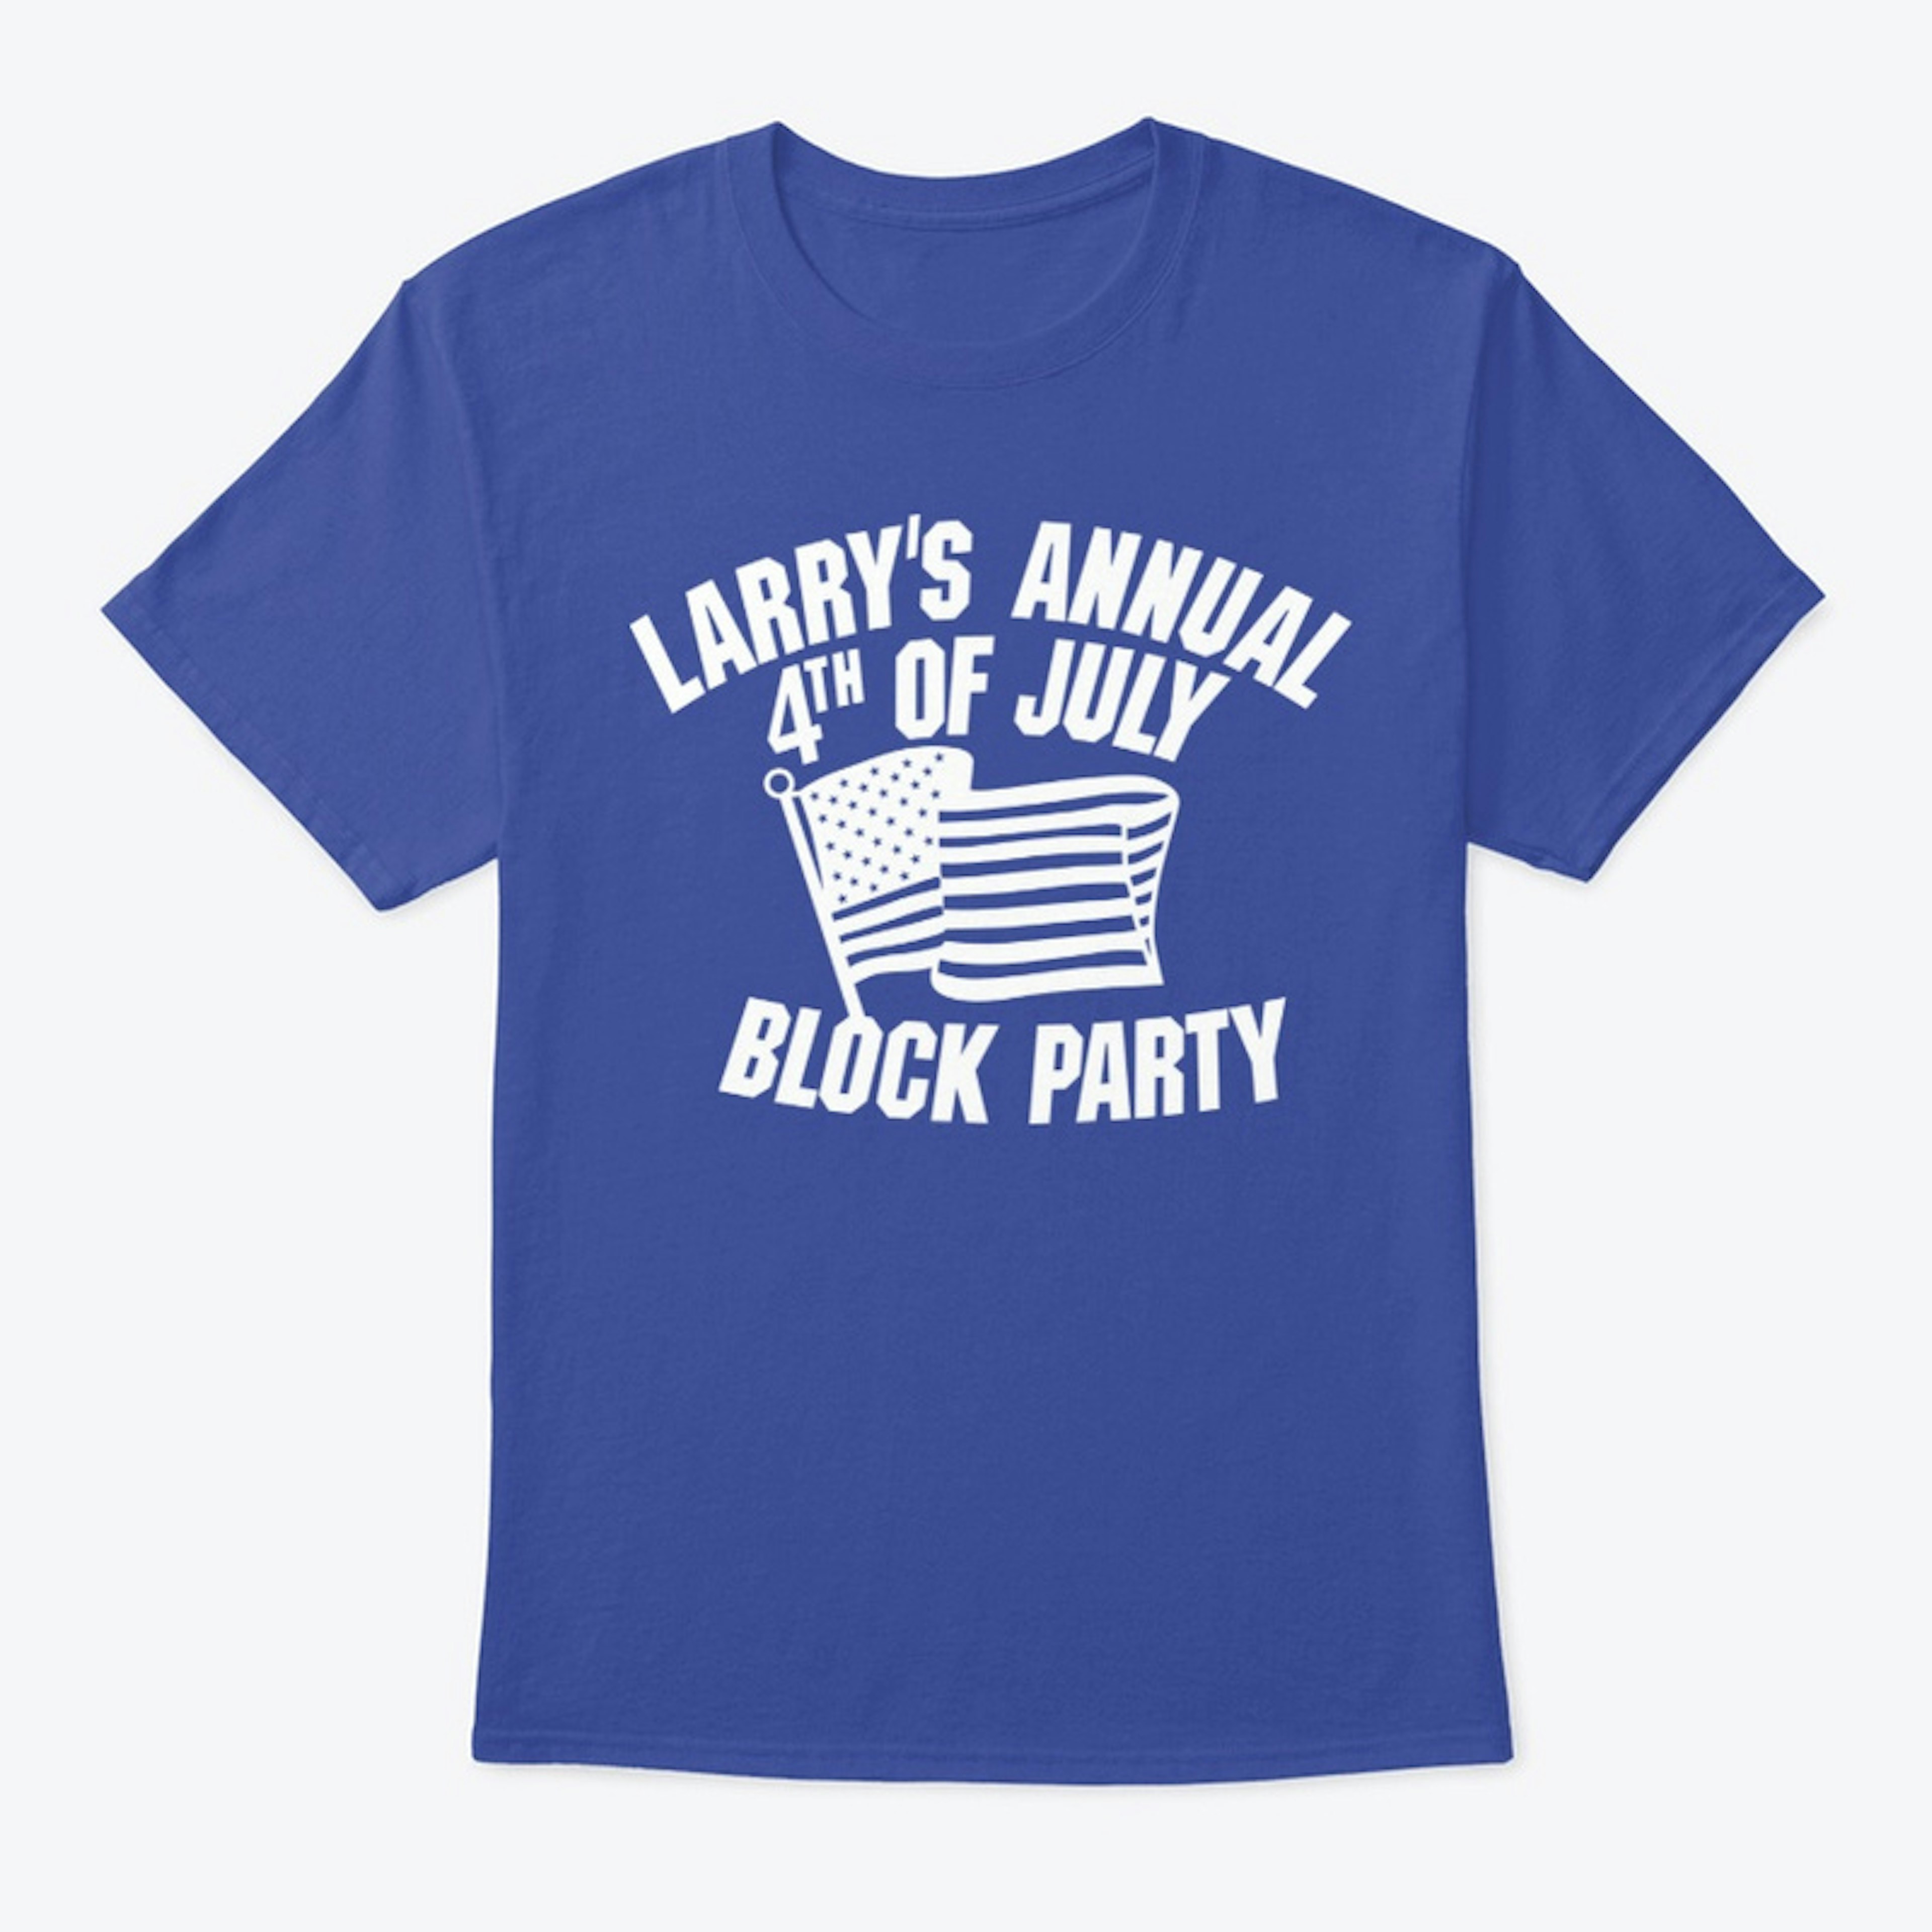 Larry's 4th of July T-Shirt